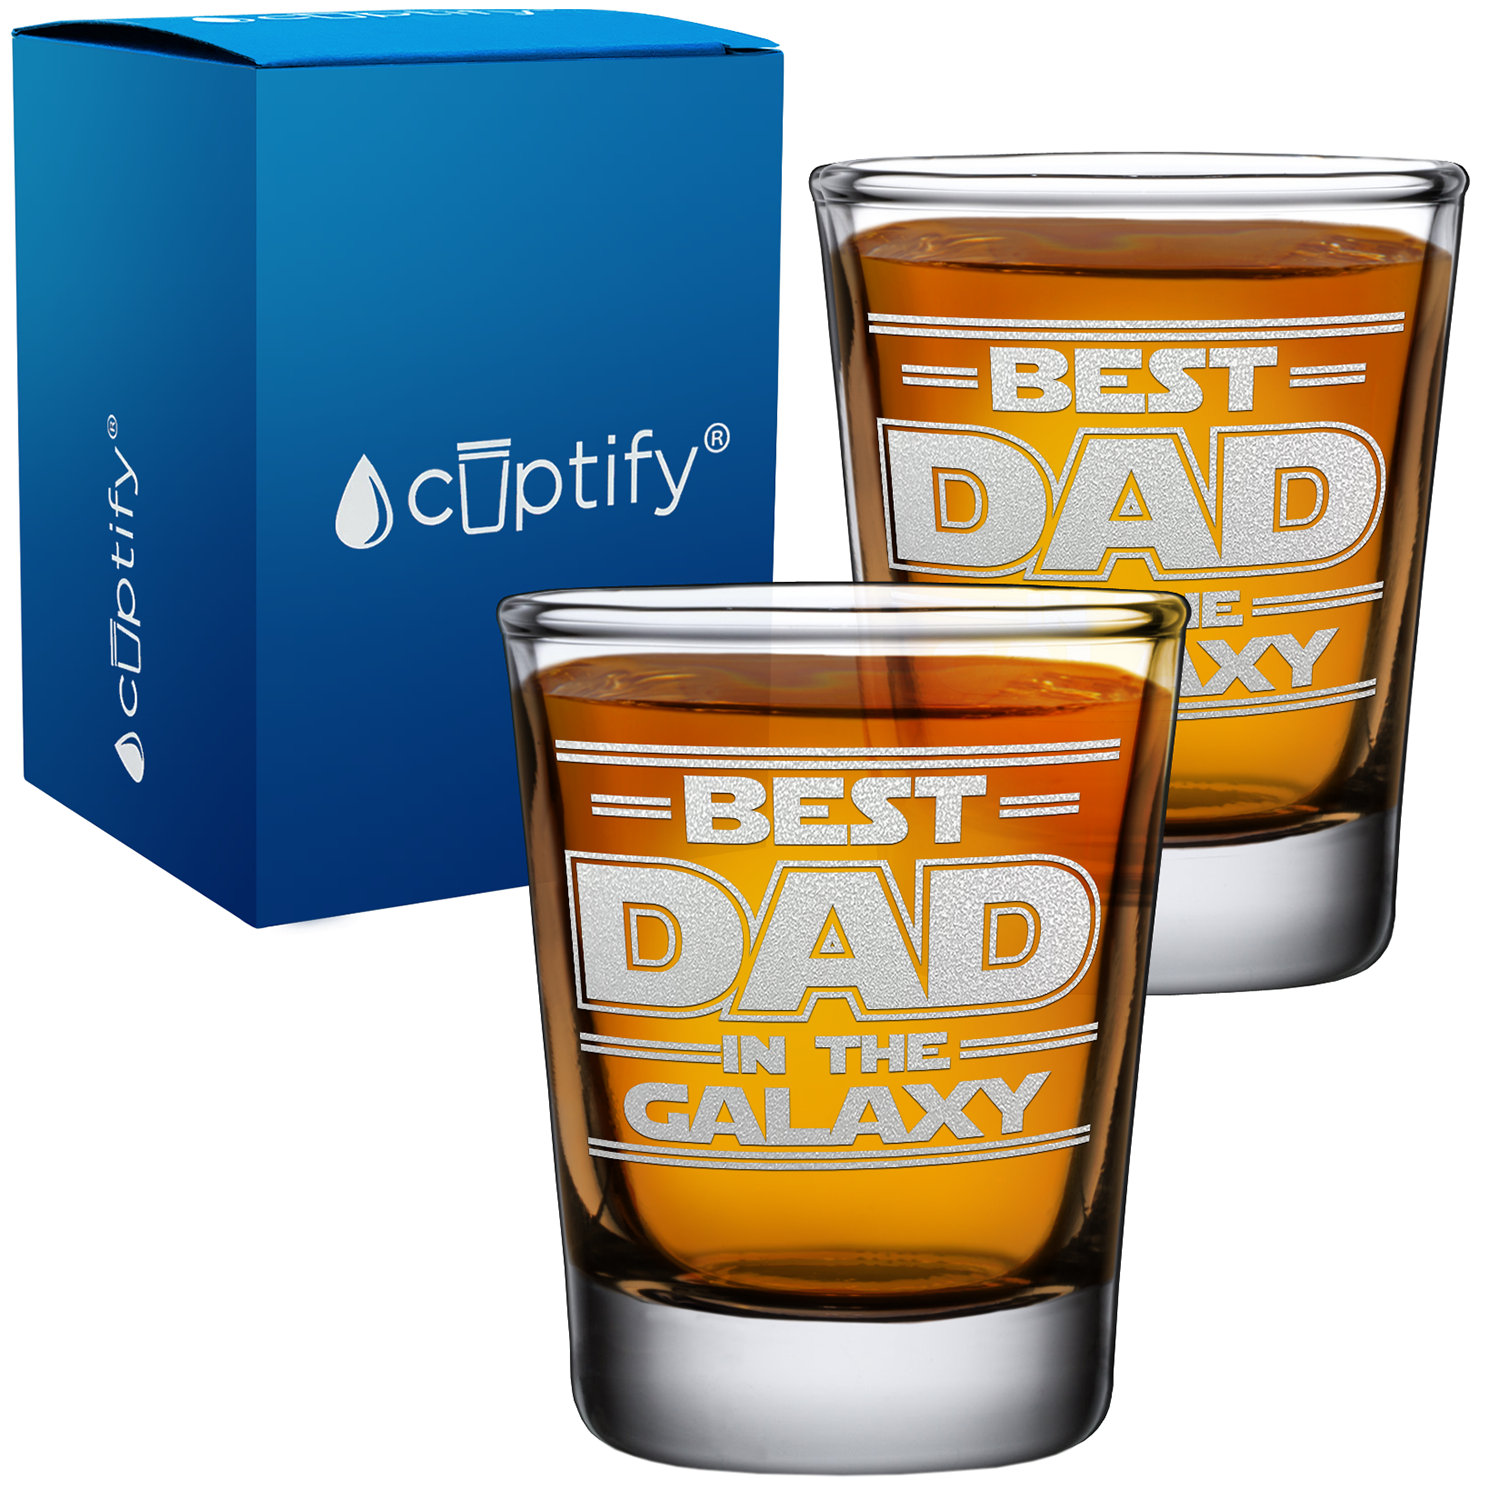 Best Dad in The Galaxy 2oz Shot Glasses - Set of 2